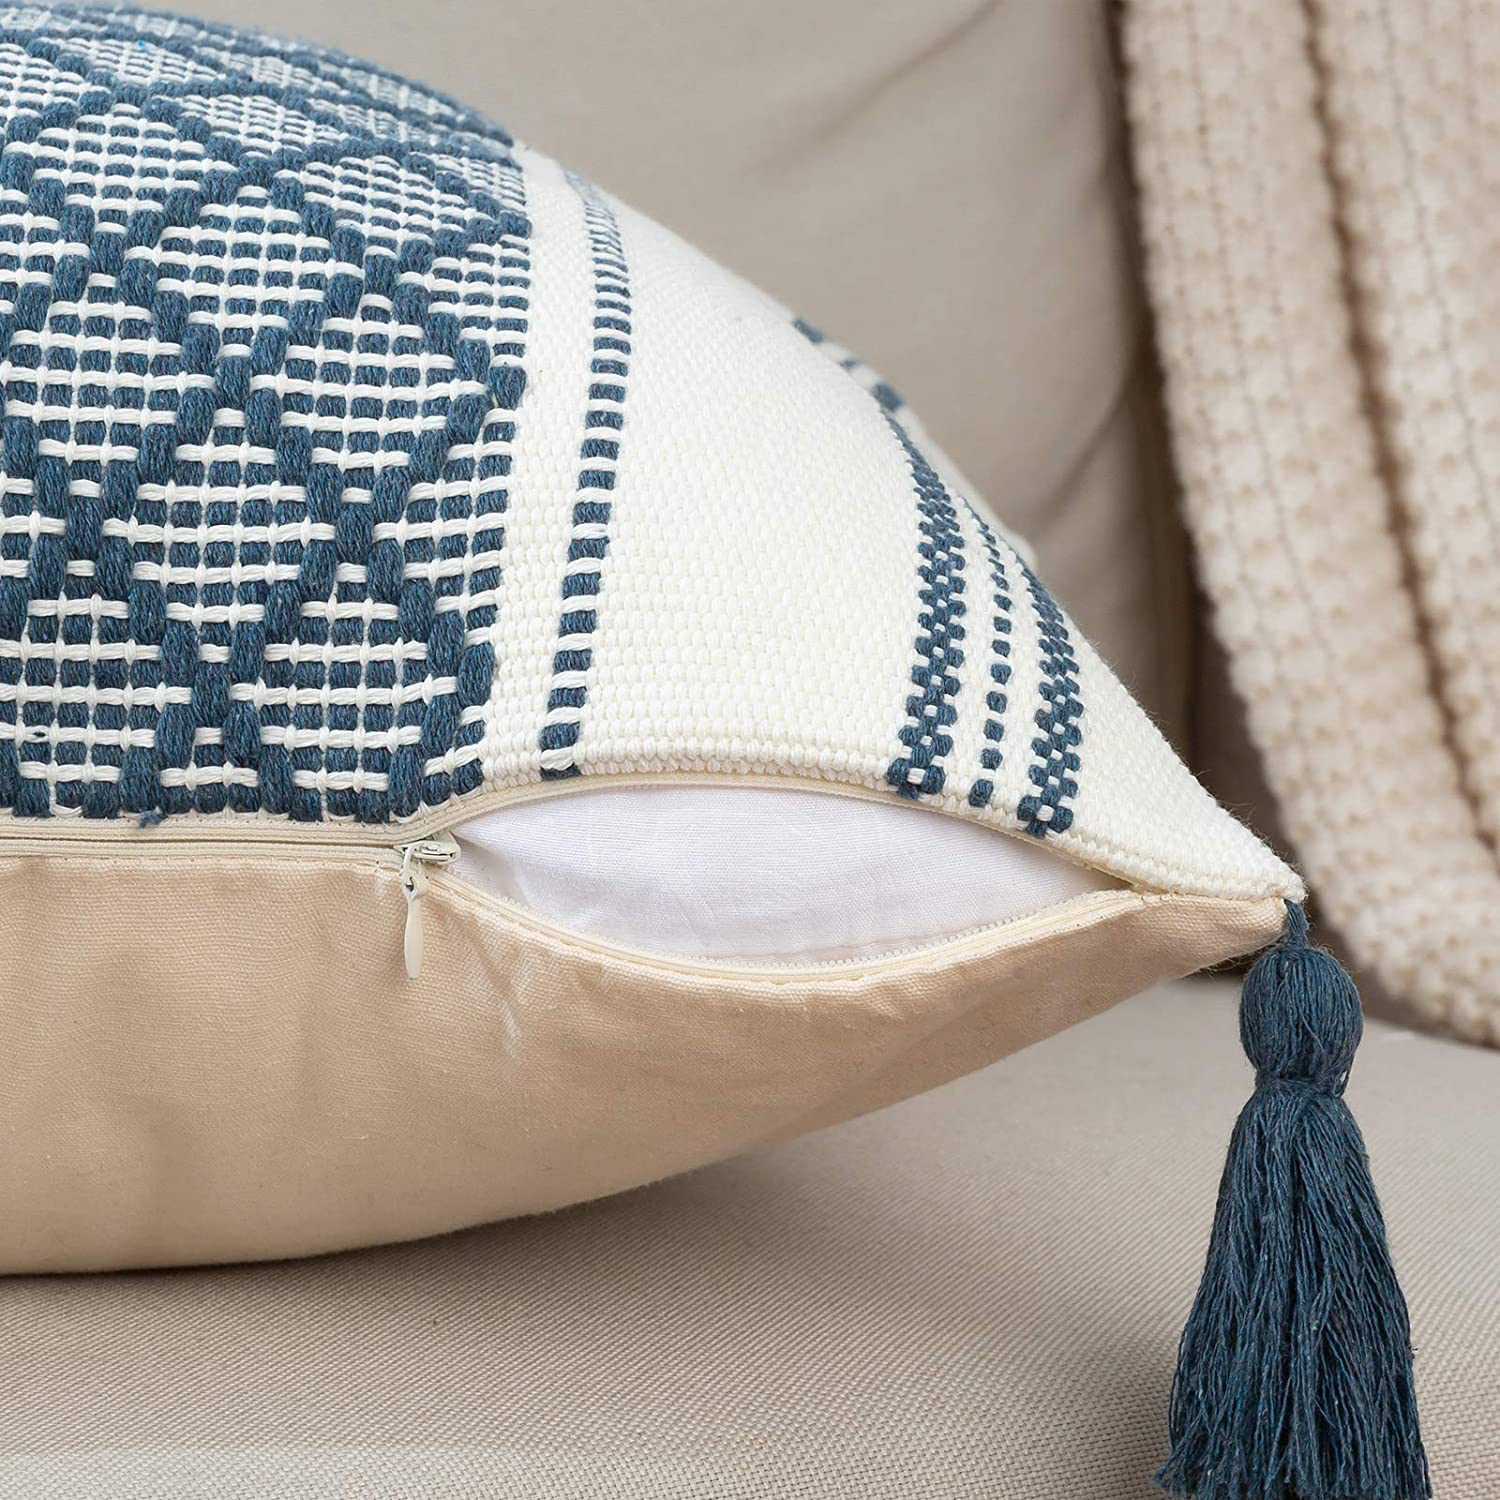 Set of 2 Boho Neutral Decorative Throw Pillow Covers 18x18 Inch, Cotton Woven Diamond Jacquard Pattern Pillow Cases for Couch Sofa Bedroom Car, Modern Accent Square Pillowcase, Blue